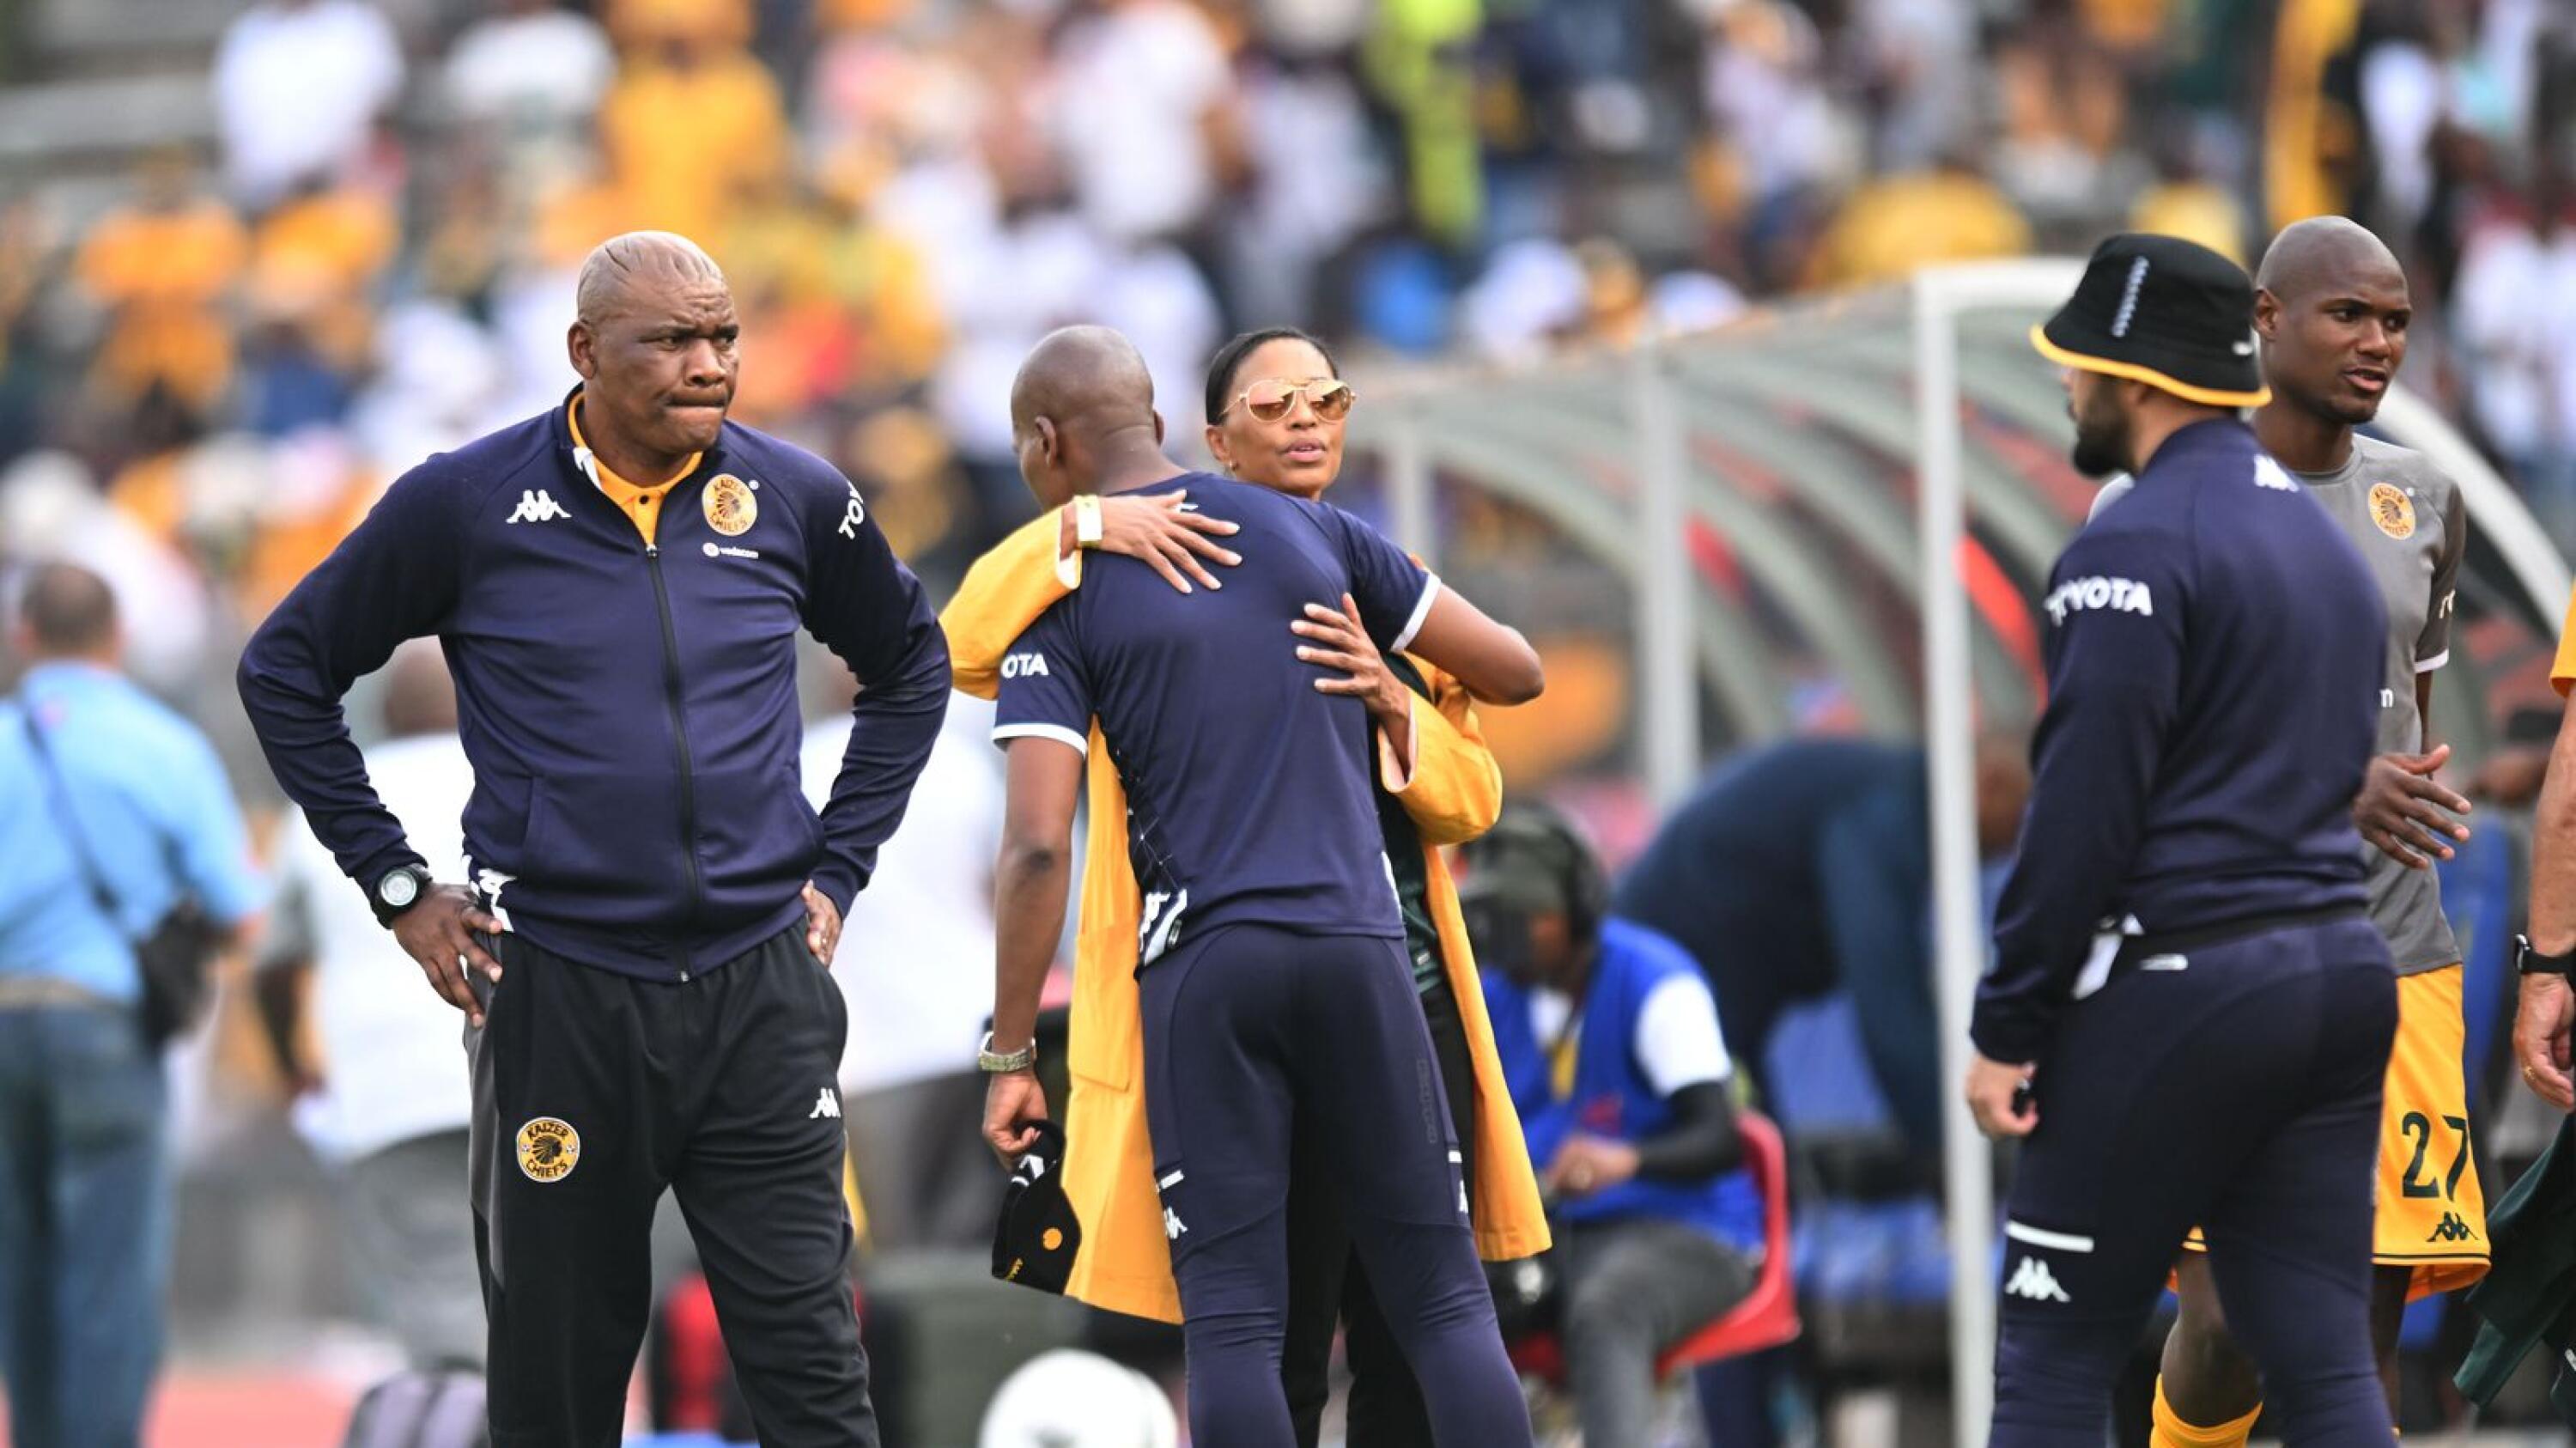 Kaizer Chiefs coach Molefi Ntseki stands on the side of the pitch 